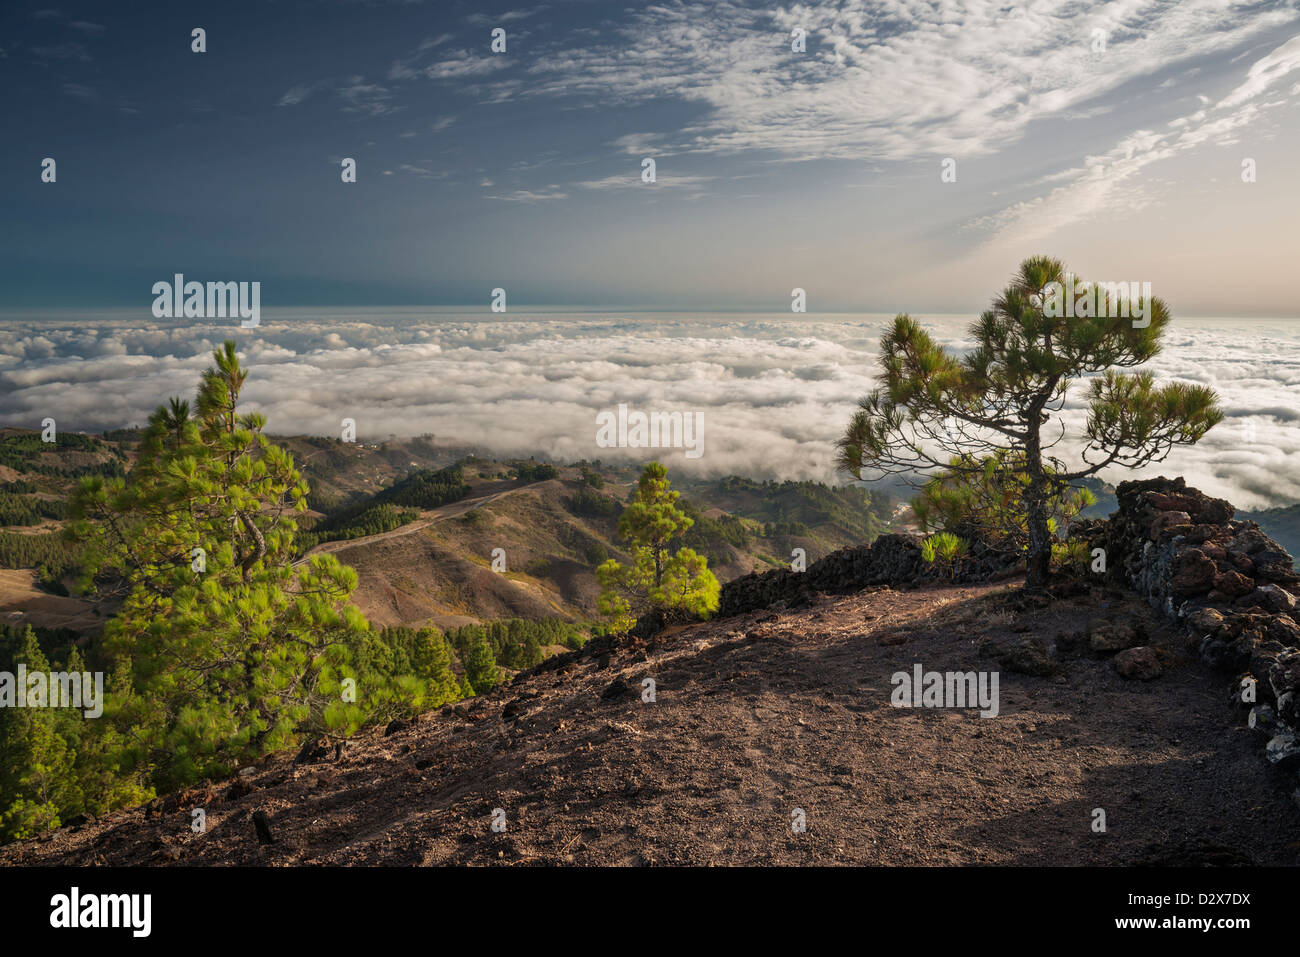 The mar de nubes (sea of clouds) which often enshrouds northern Gran Canaria, from the crater rim of Pinos de Galdar Volcano Stock Photo